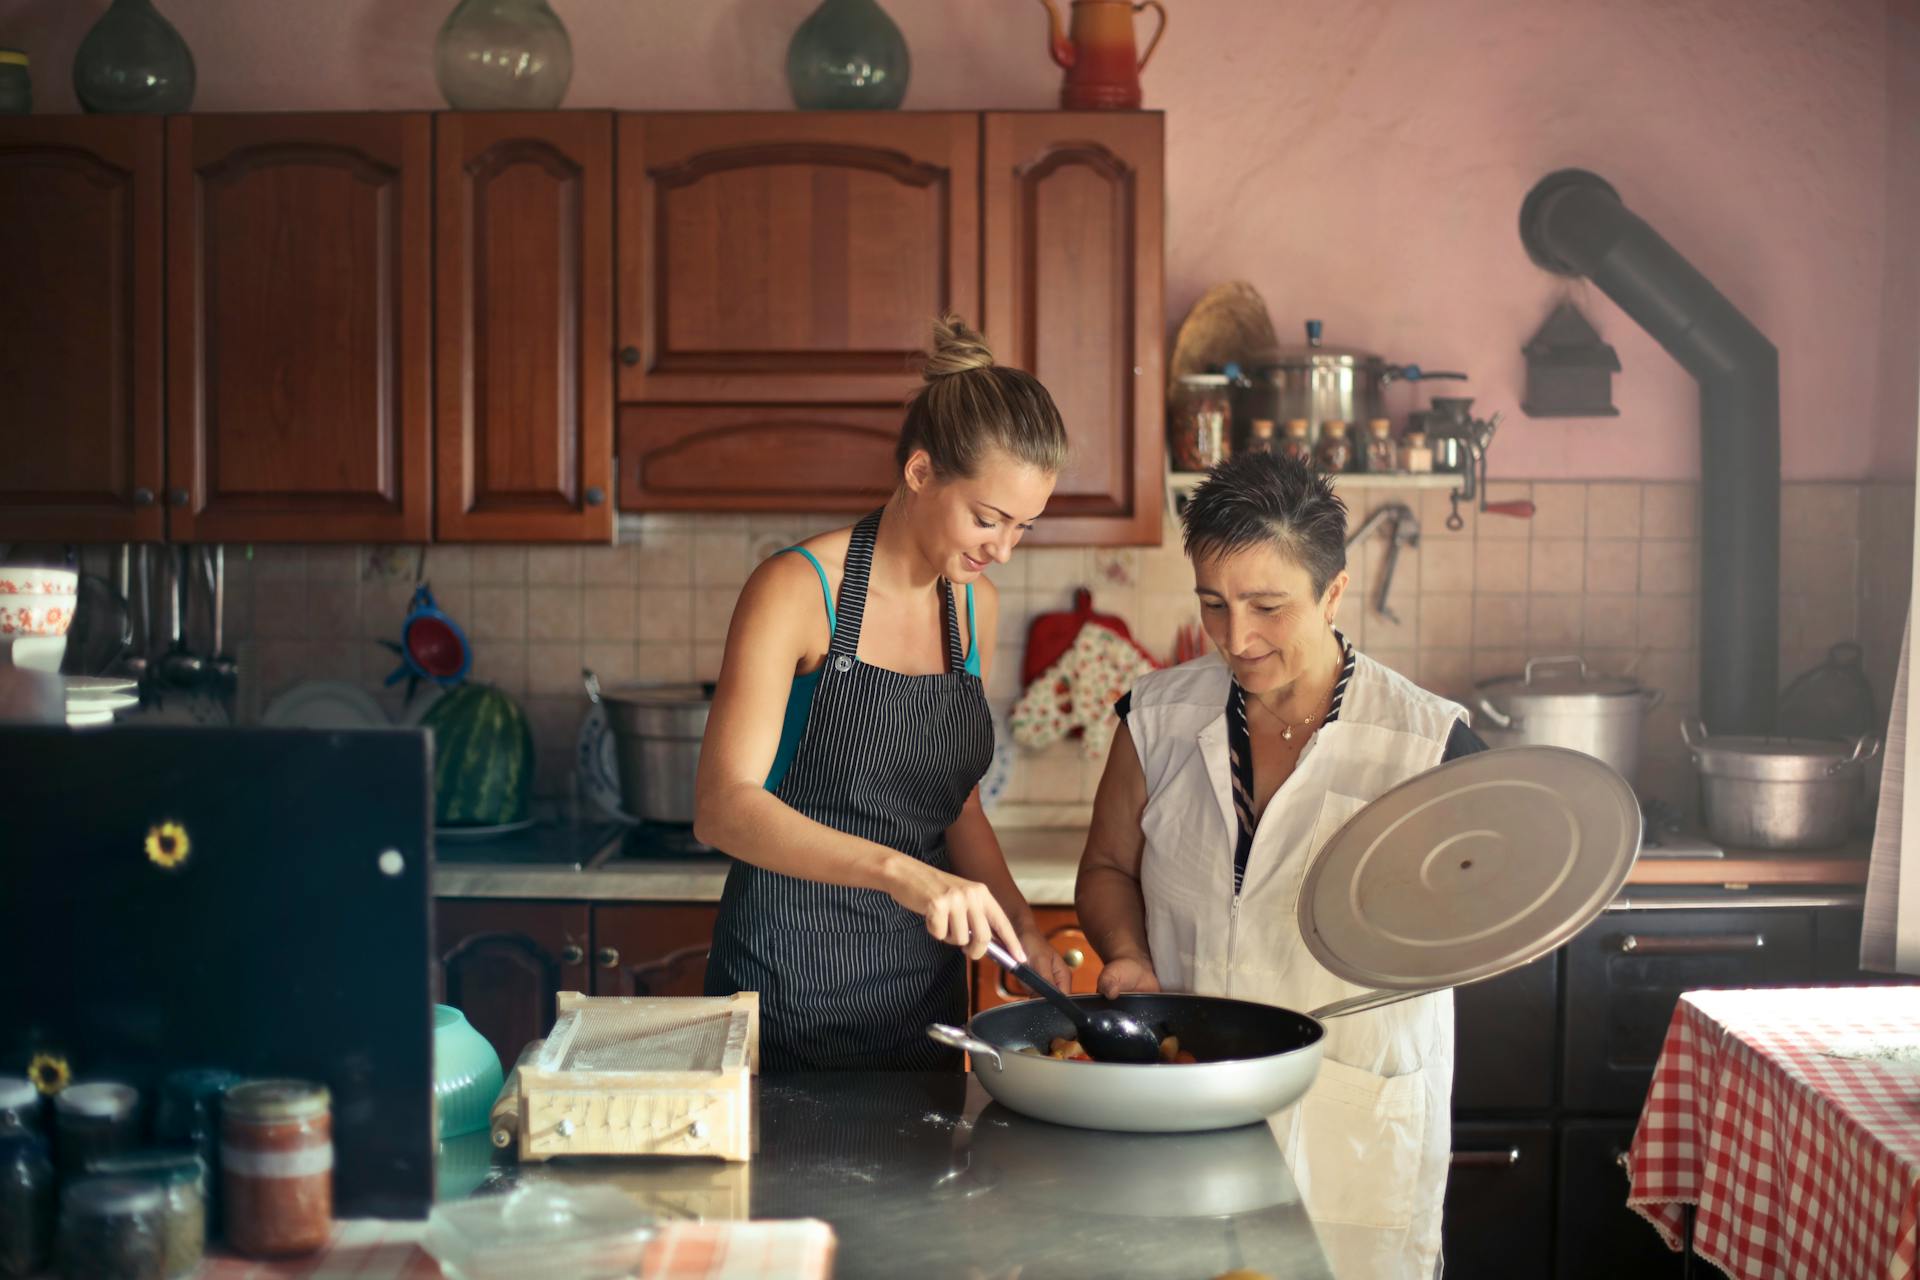 A young woman and her mom cooking food | Source: Pexels